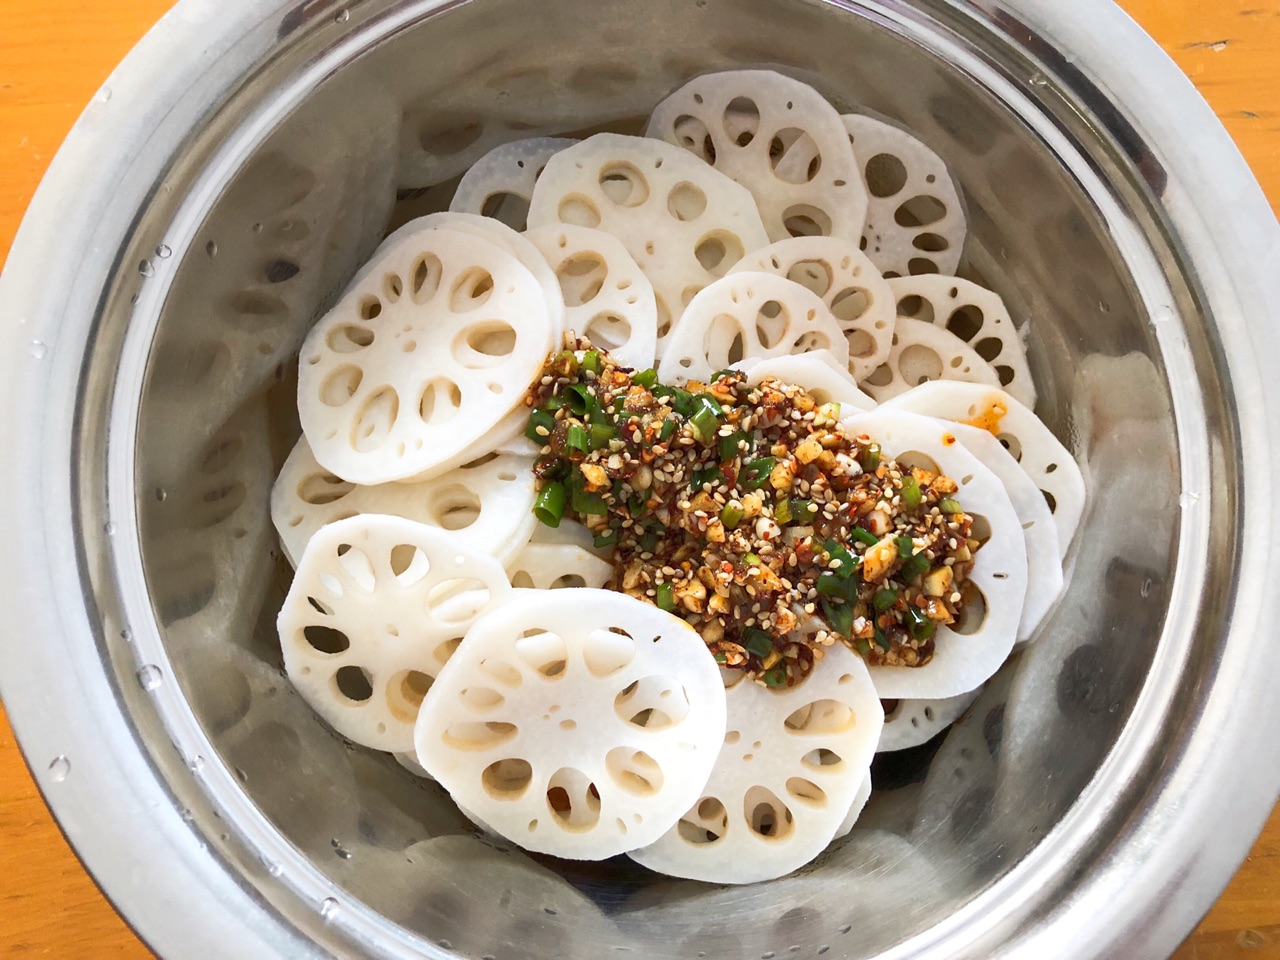 Pour the sauce into the lotus root slices and stir evenly